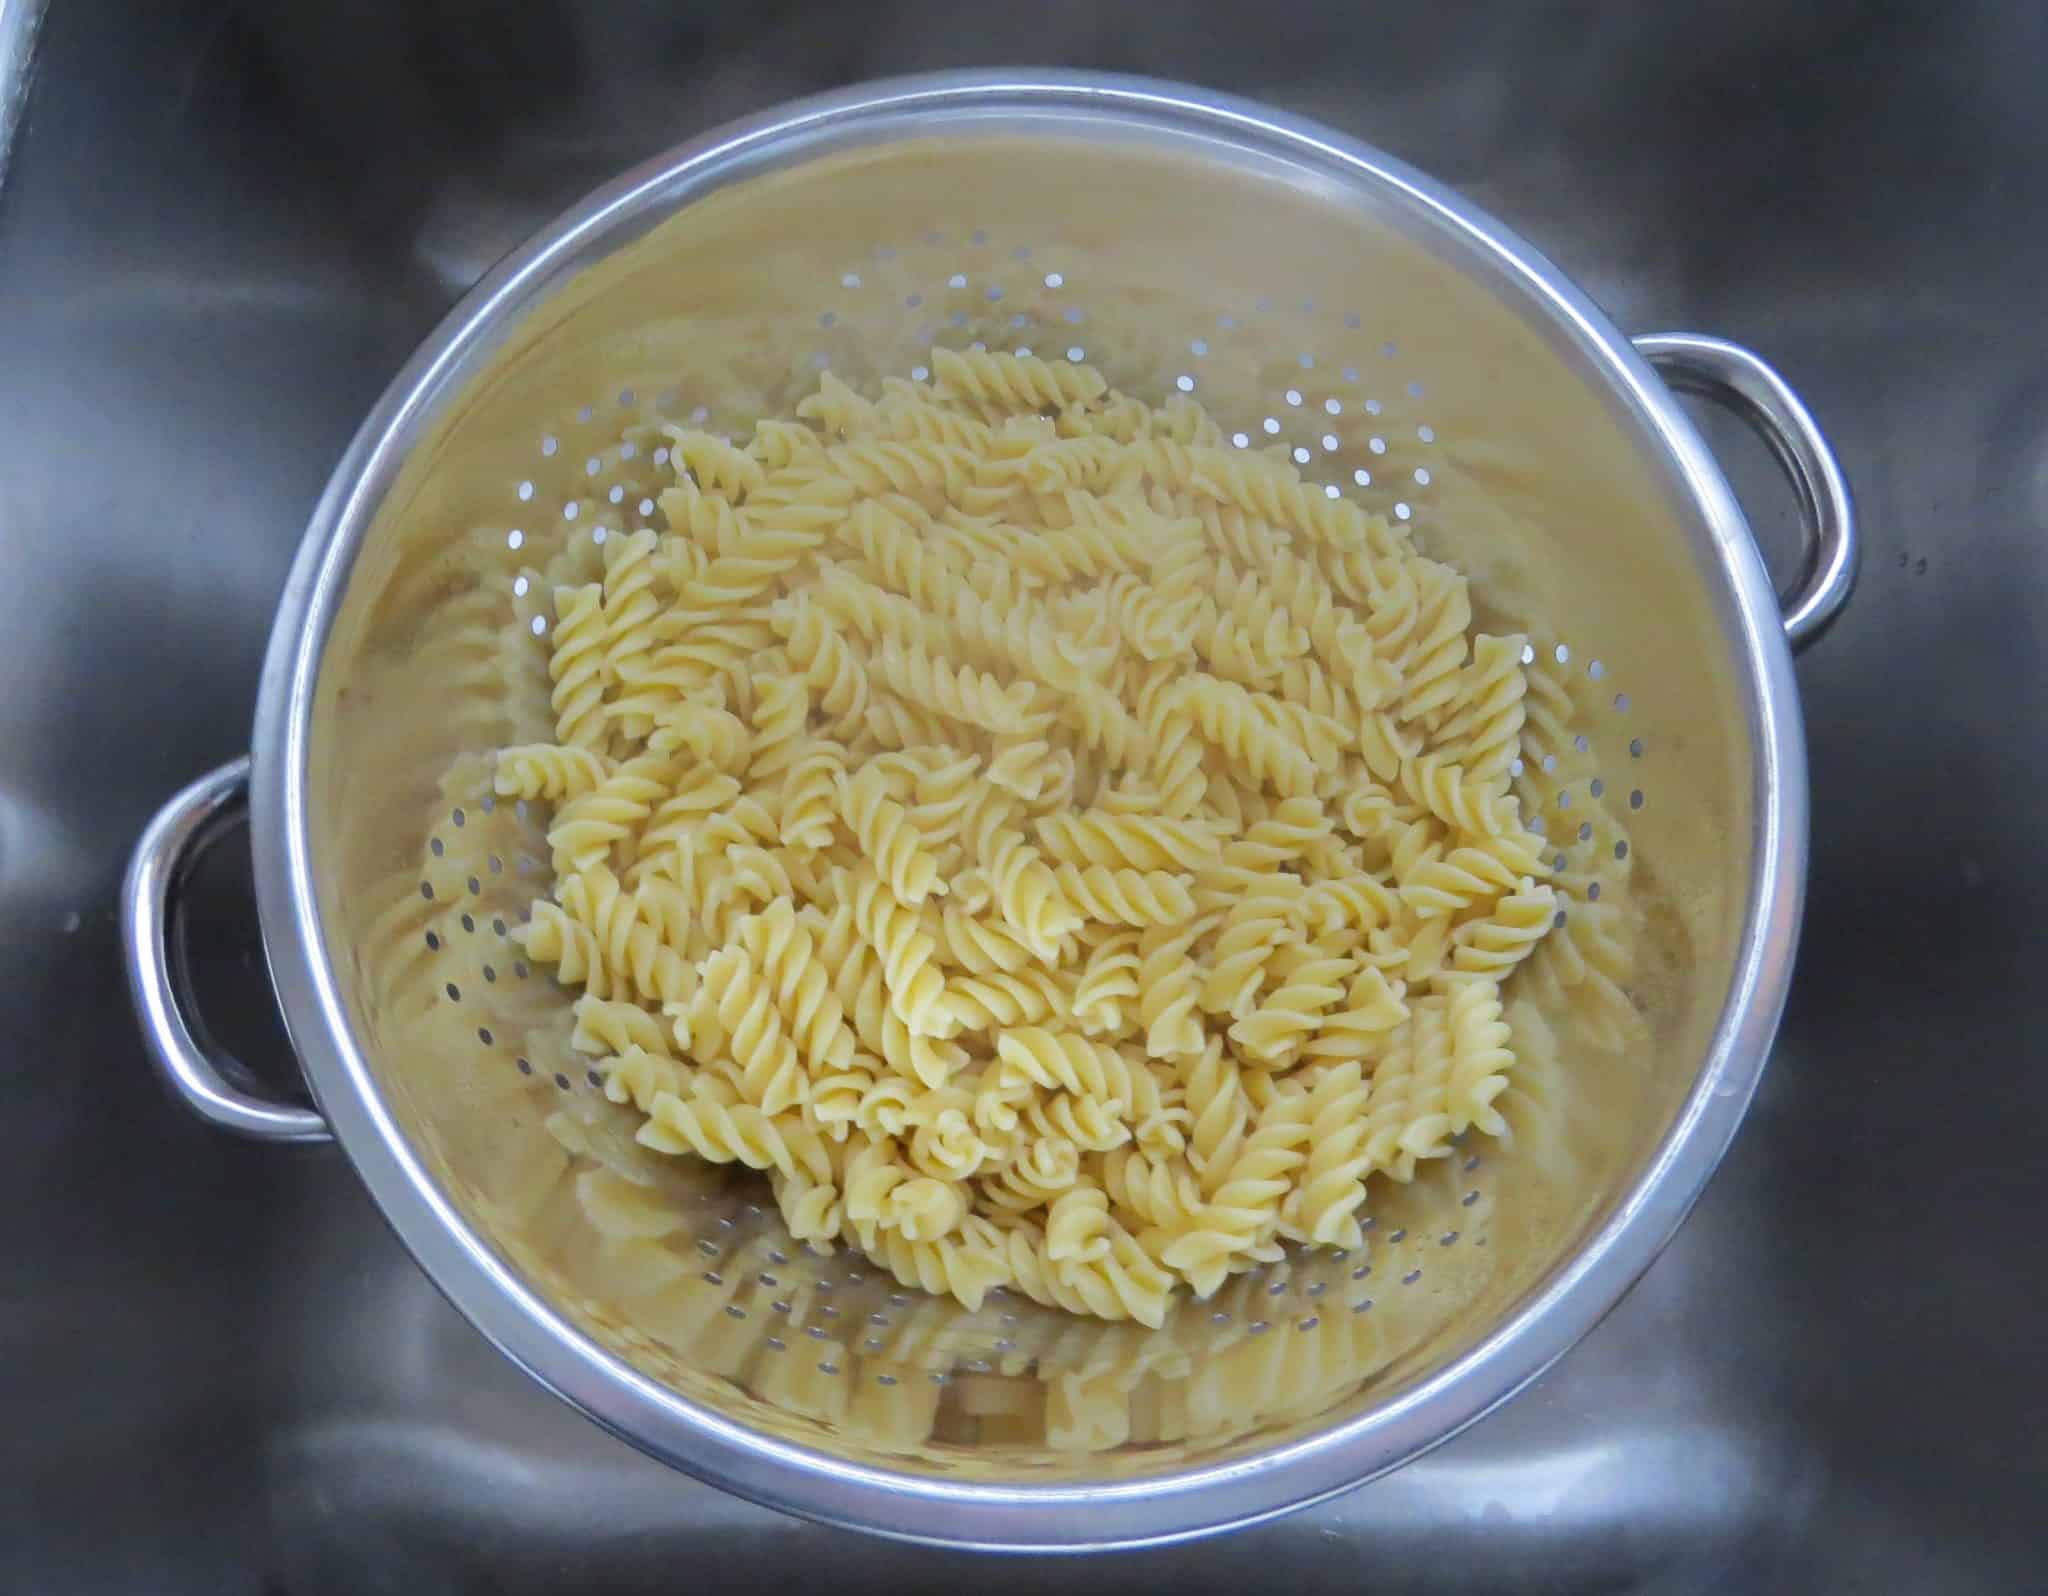 draining excess water from rotini pasta in a metal strainer.